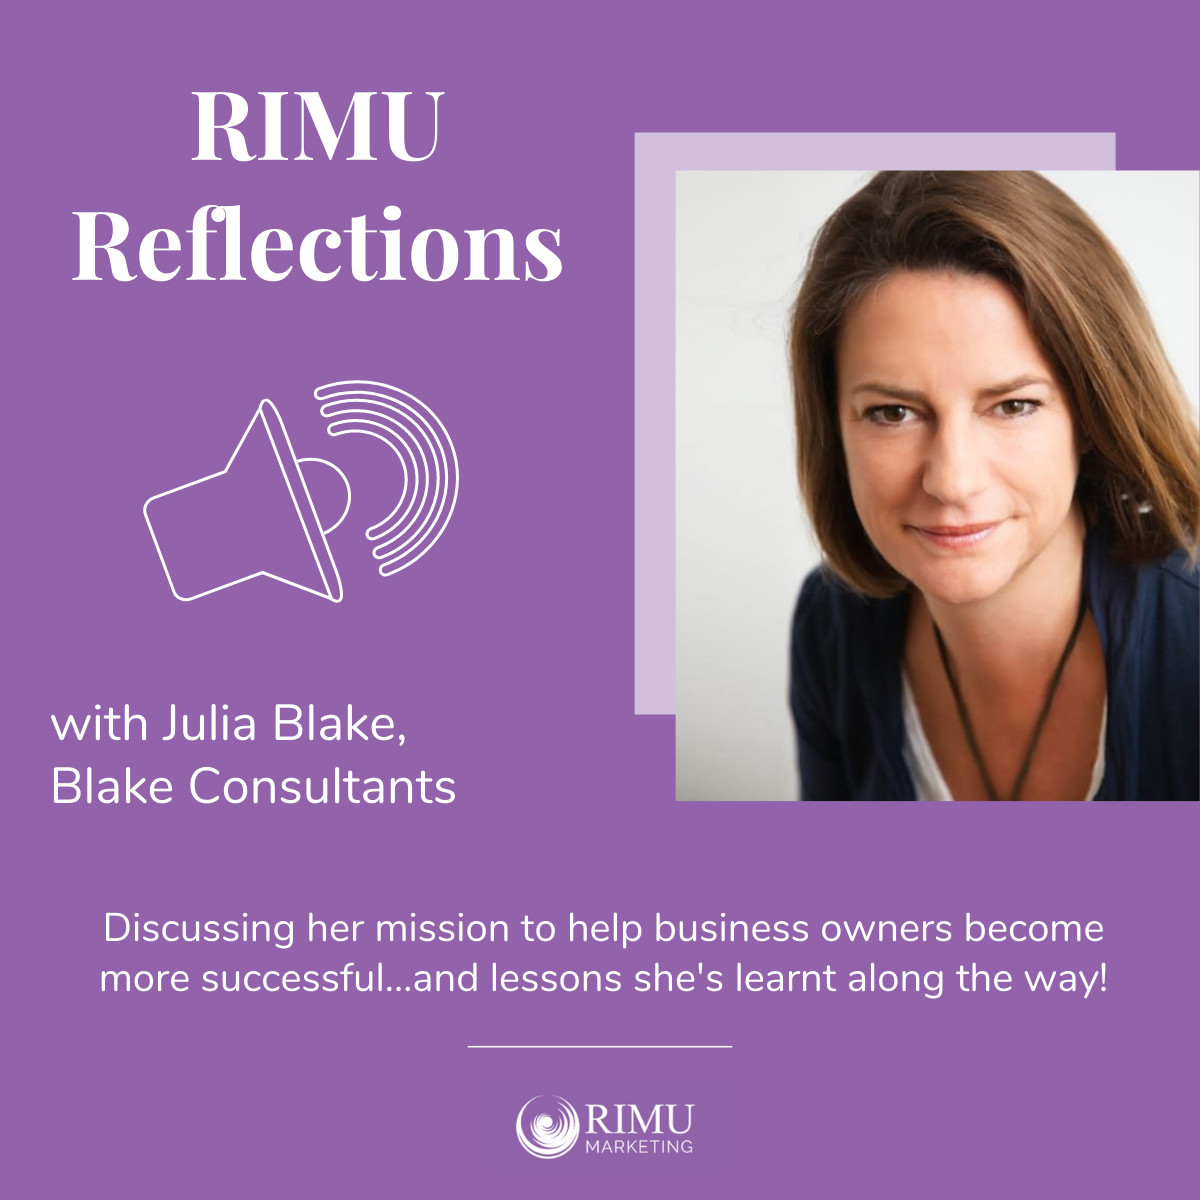 RIMU Reflections - an interview with Julia Blake